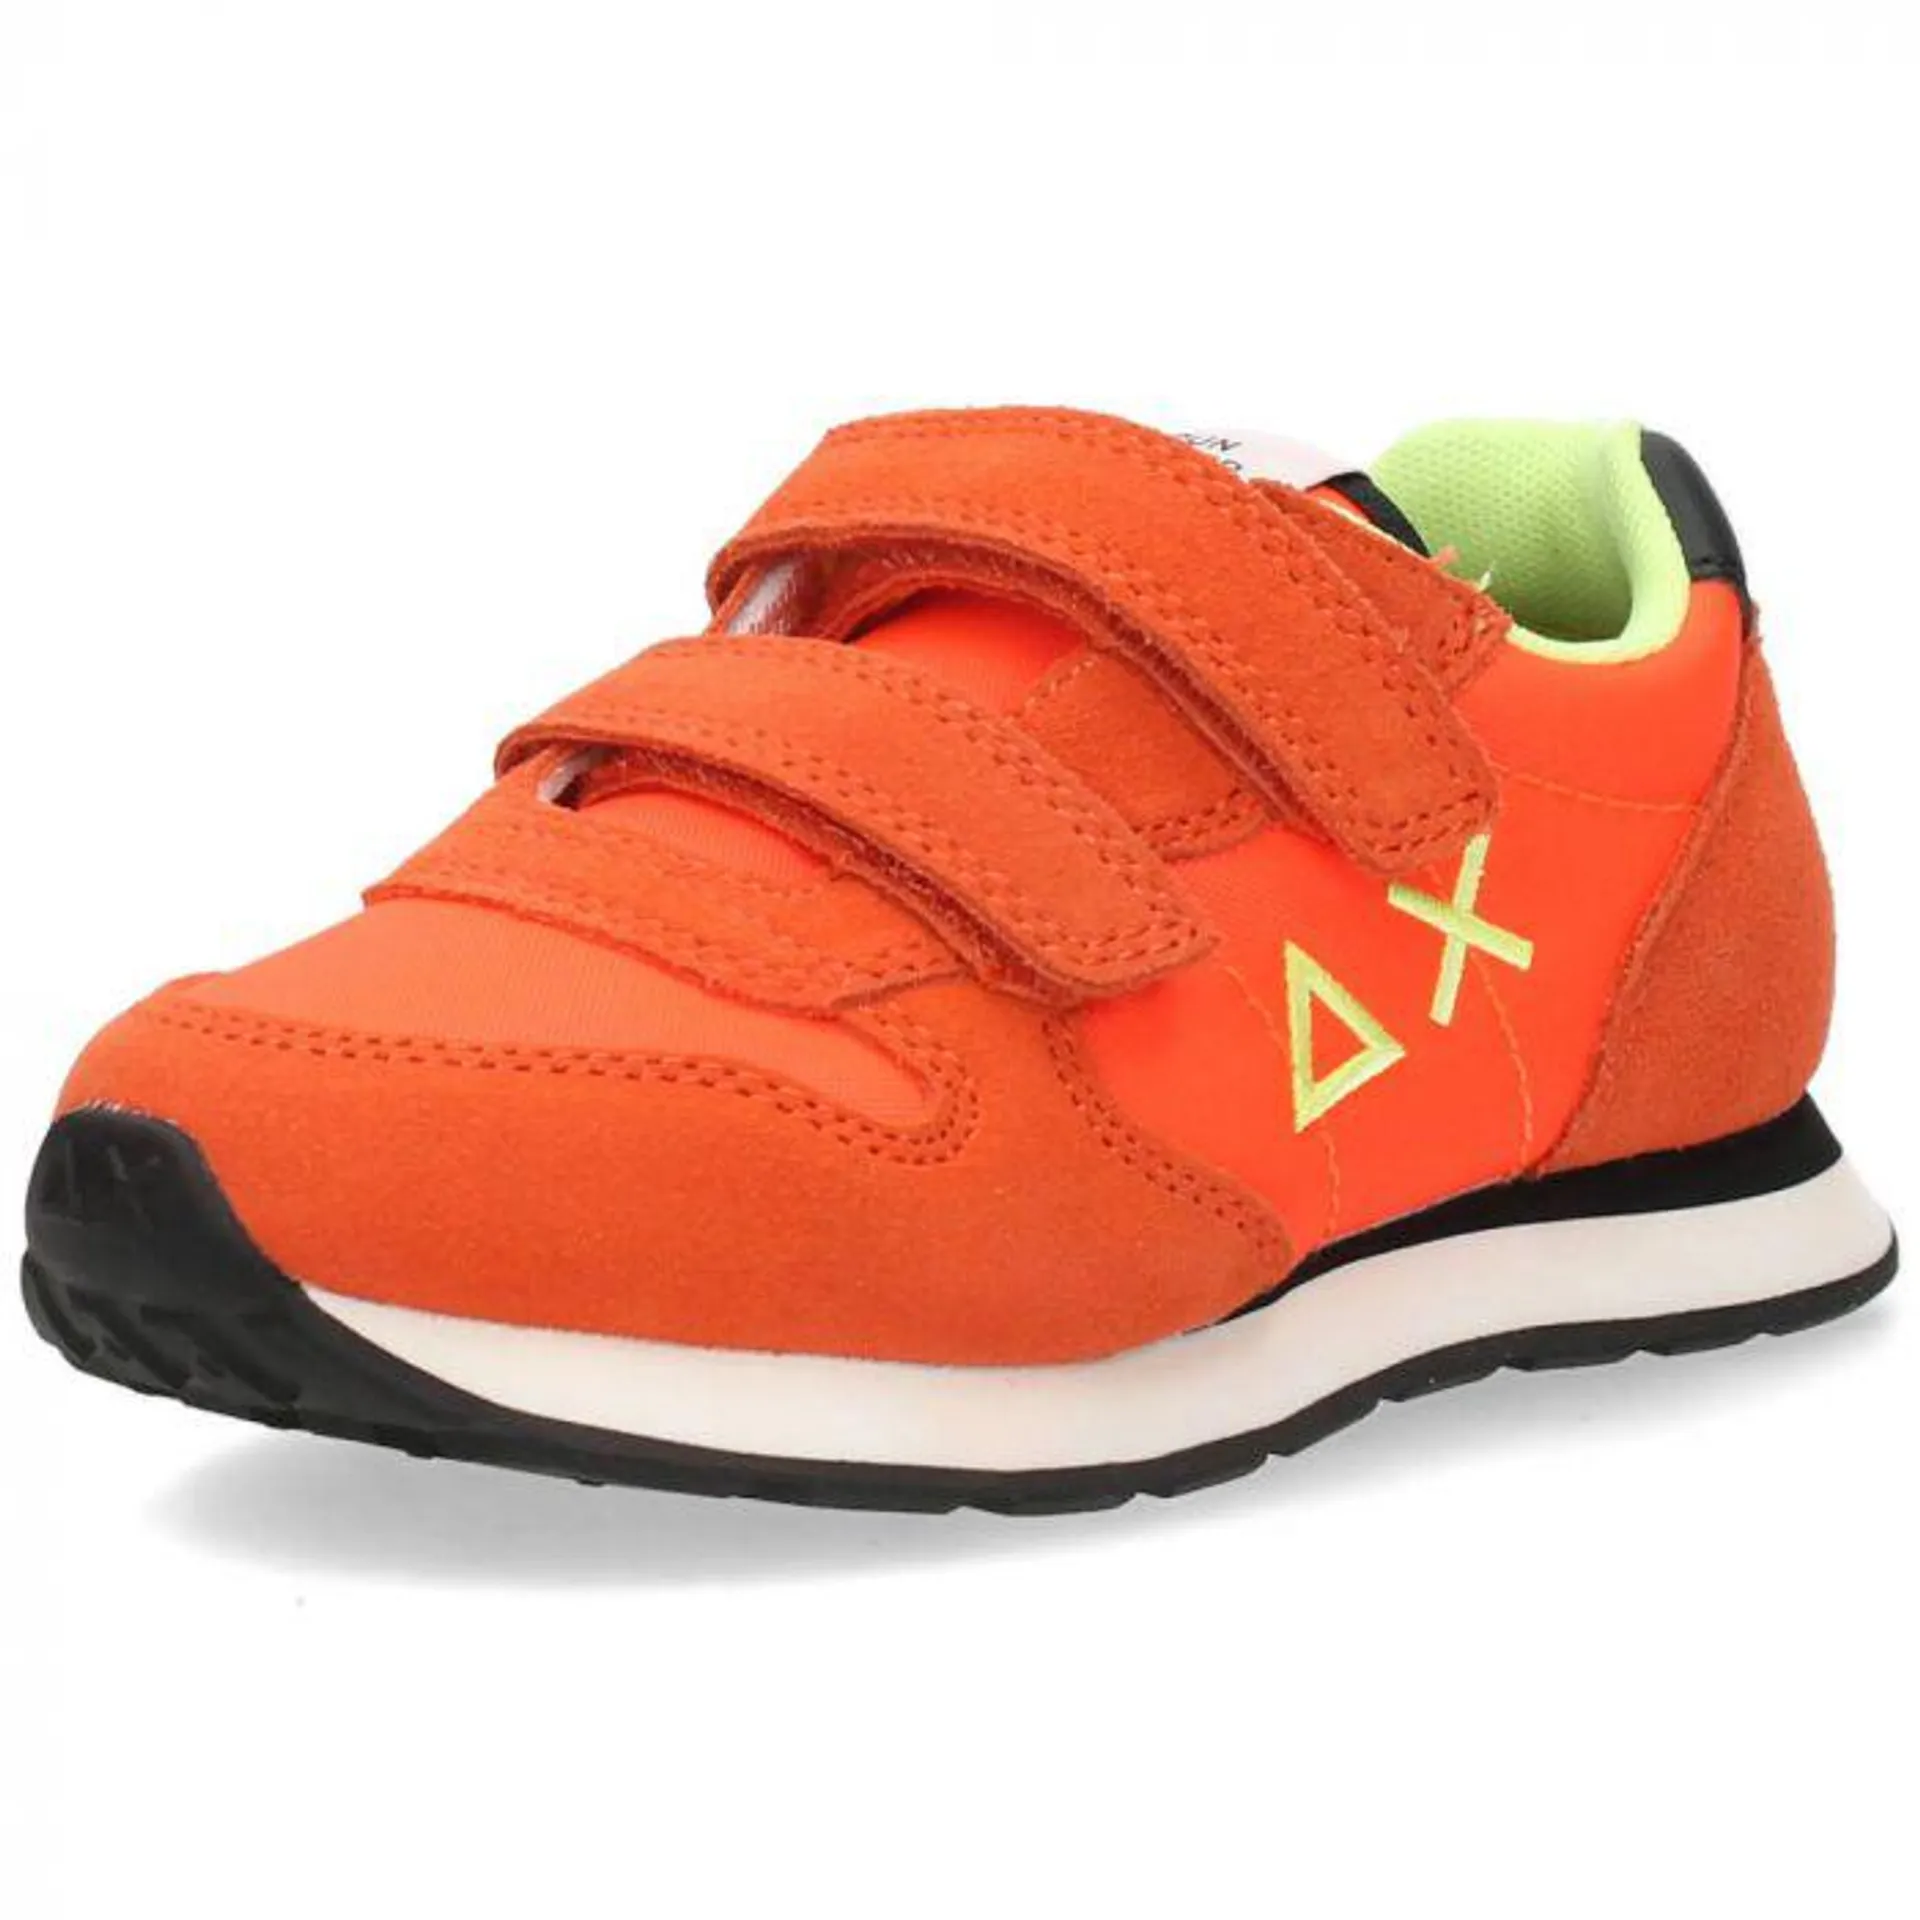 WEB ONLY - Fluo oranje sneakers